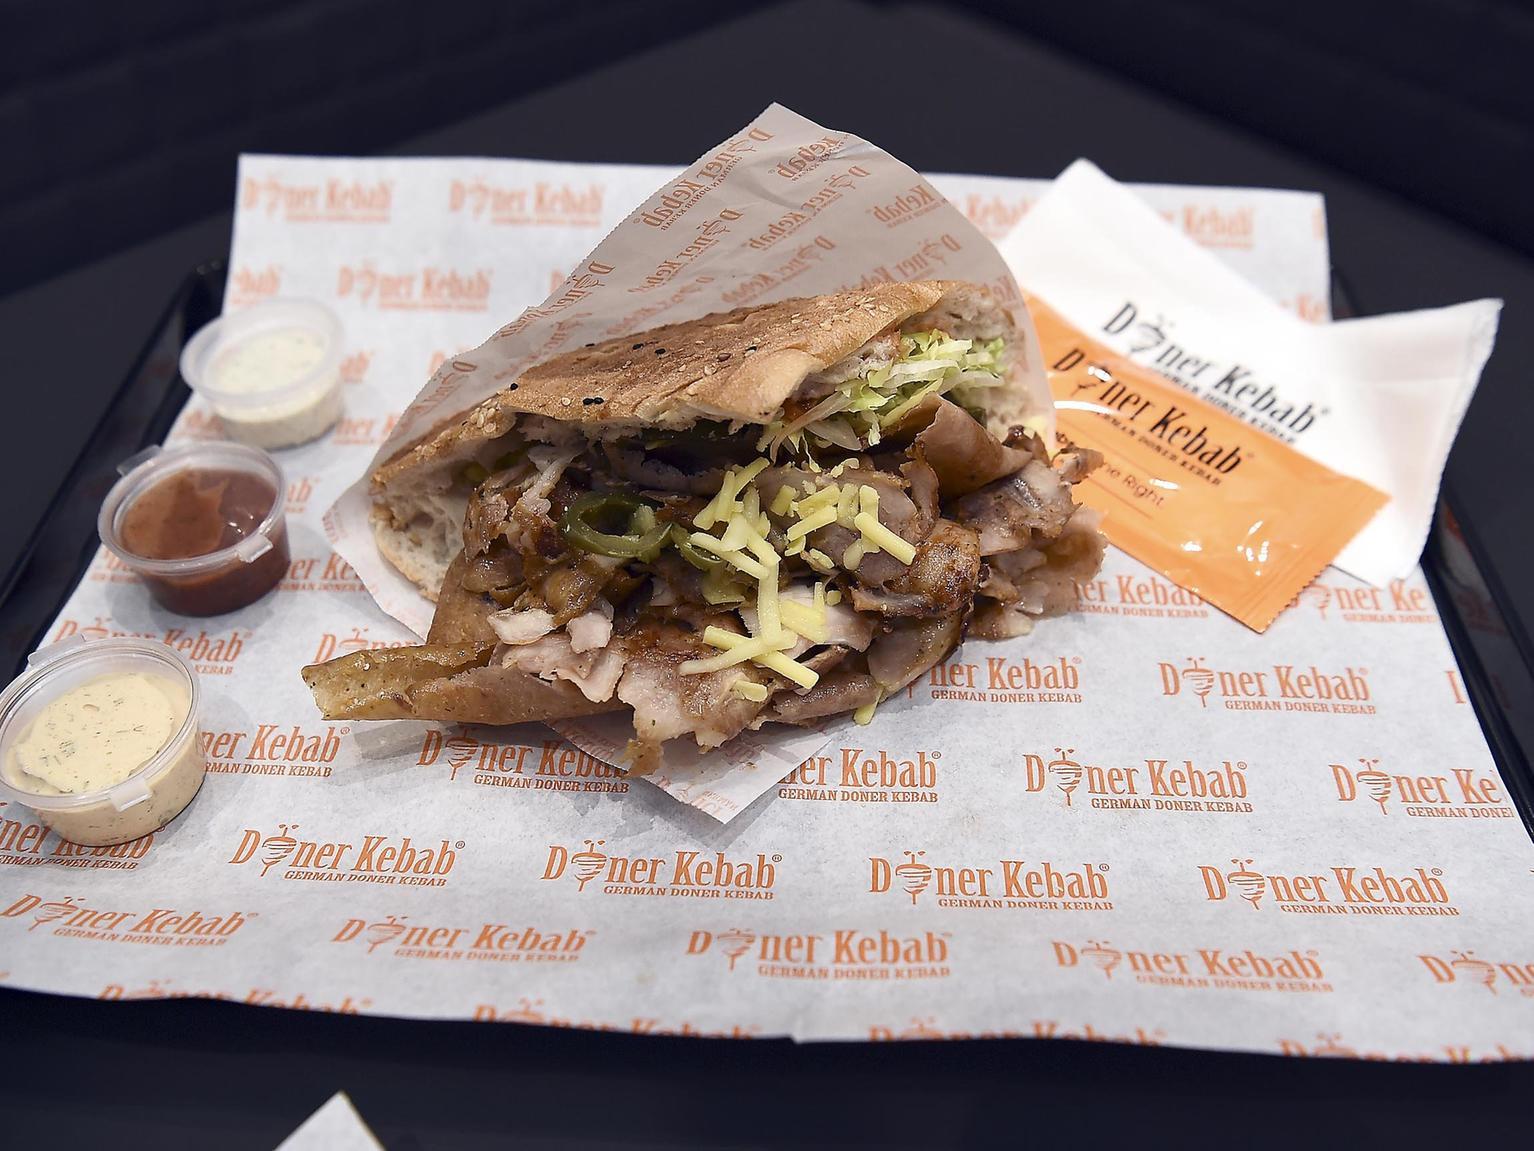 meals such as the original German doner kebab, doner quesadillas and doner burgers only cost up to 7.99